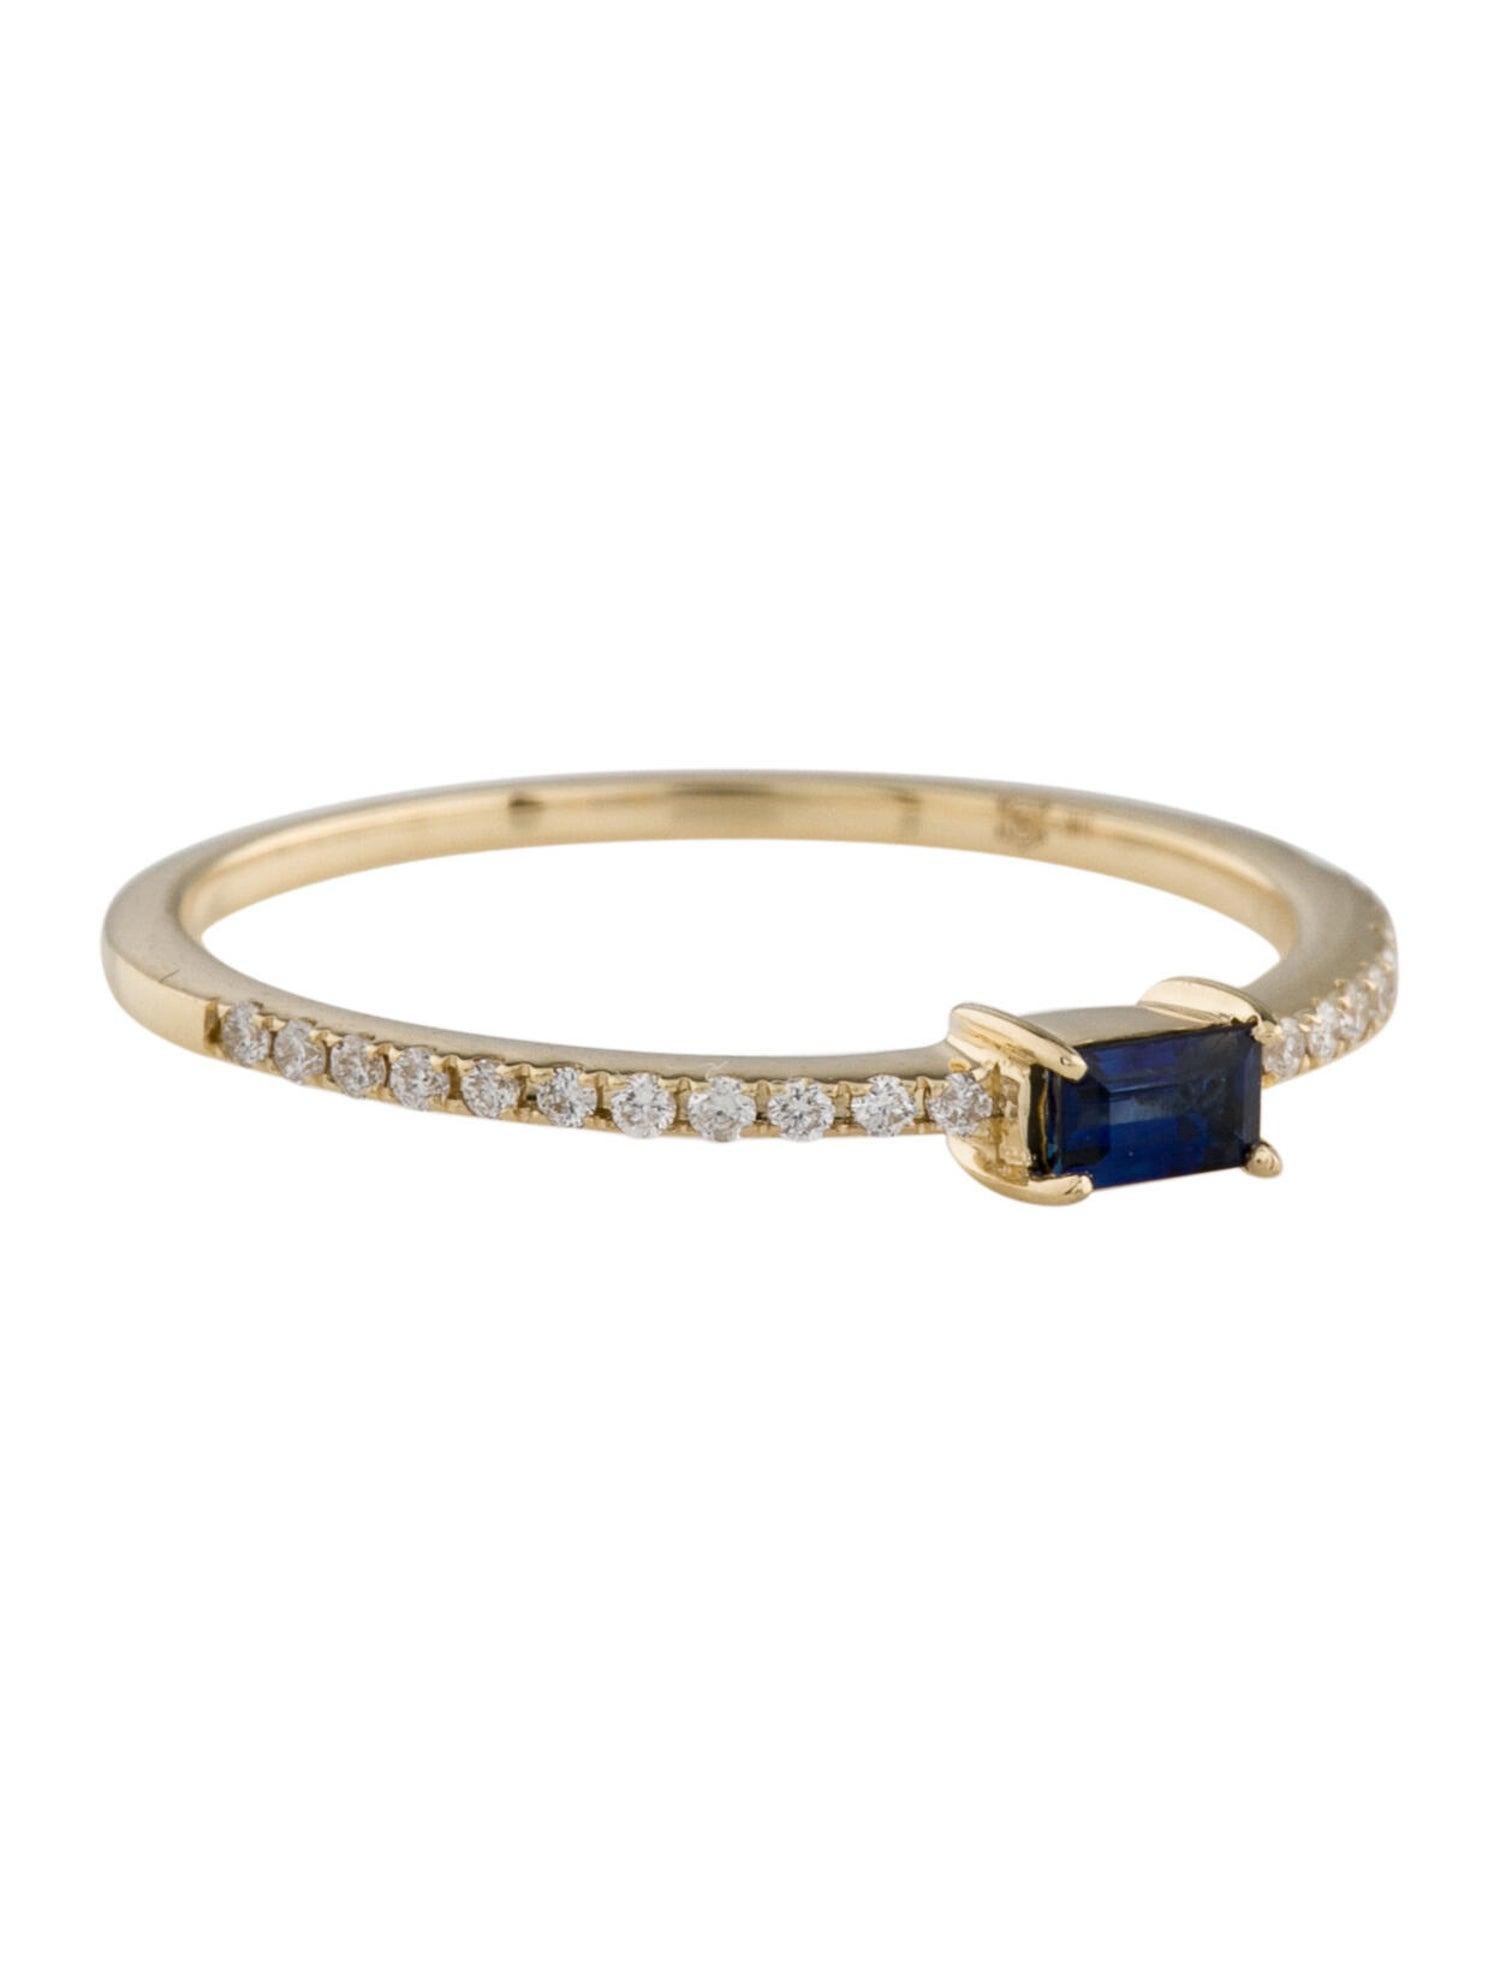 Women's 14 Karat Yellow Gold Blue Sapphire Stackable Ring For Sale